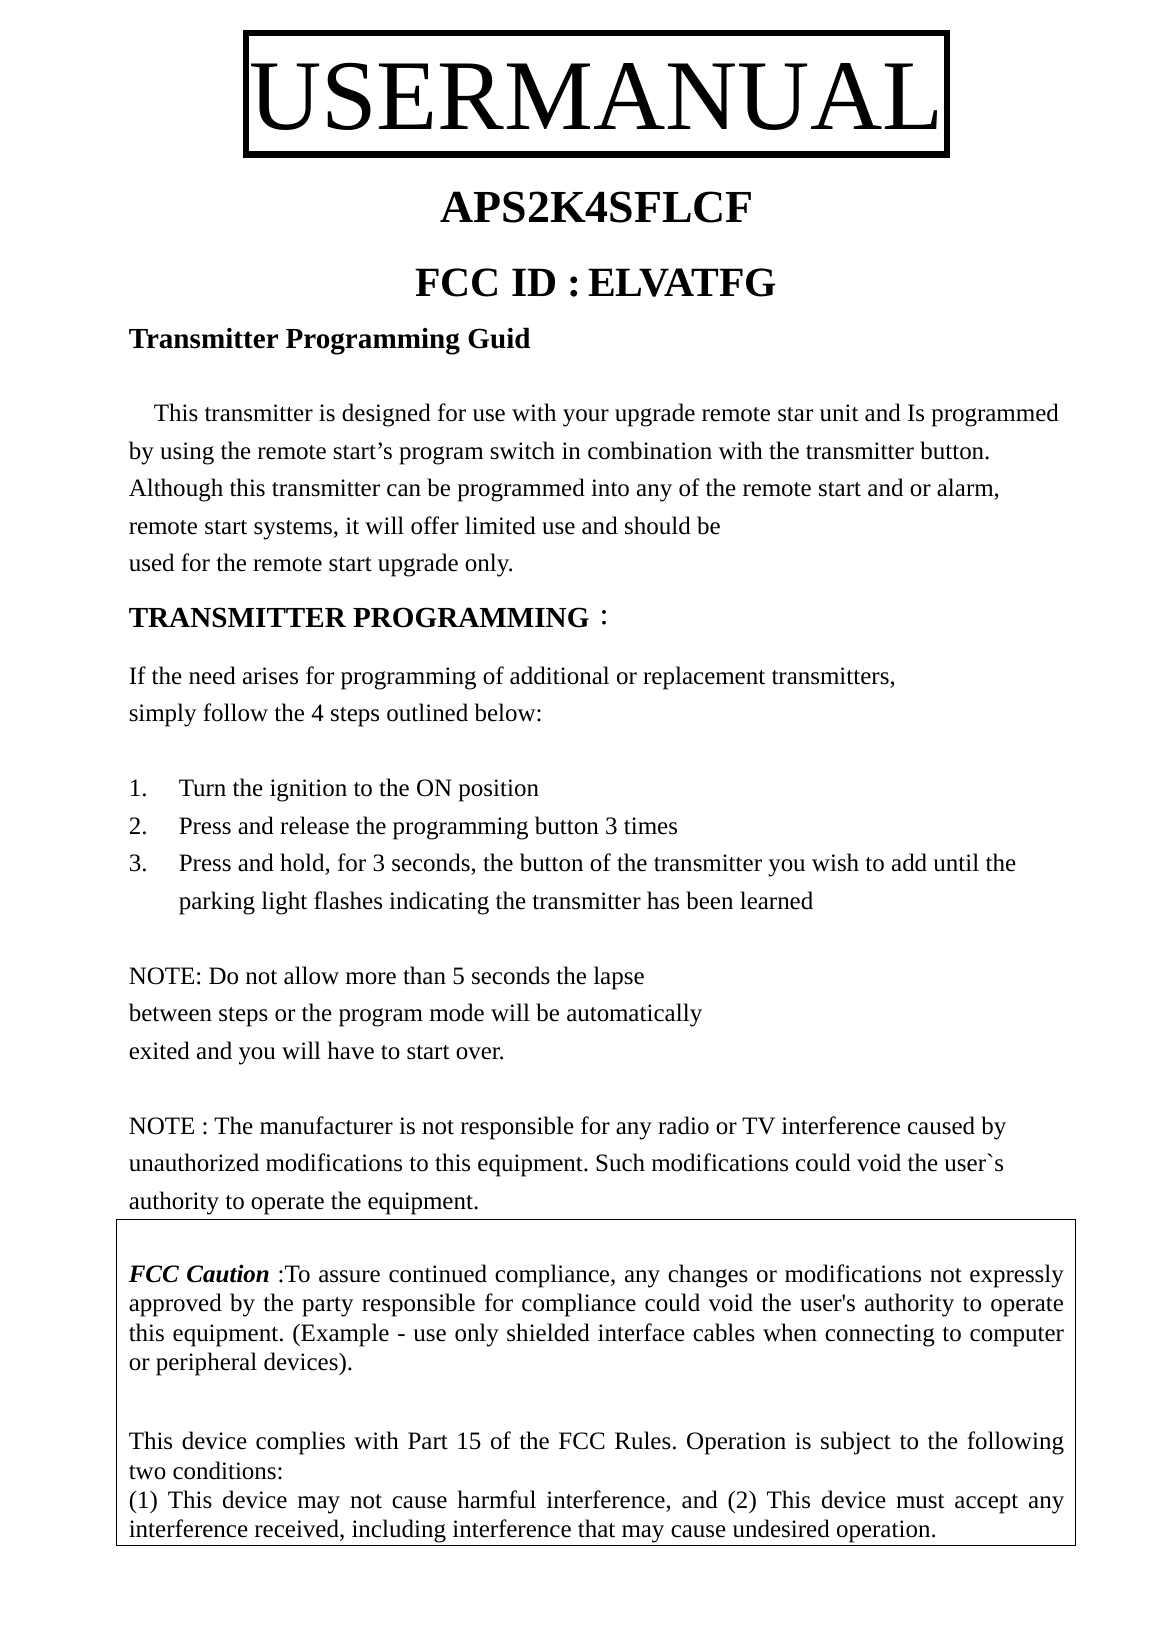 USERMANUAL APS2K4SFLCF  FCC ID : ELVATFG Transmitter Programming Guid      This transmitter is designed for use with your upgrade remote star unit and Is programmed by using the remote start’s program switch in combination with the transmitter button. Although this transmitter can be programmed into any of the remote start and or alarm, remote start systems, it will offer limited use and should be   used for the remote start upgrade only. TRANSMITTER PROGRAMMING： If the need arises for programming of additional or replacement transmitters, simply follow the 4 steps outlined below:  1. Turn the ignition to the ON position   2. Press and release the programming button 3 times   3. Press and hold, for 3 seconds, the button of the transmitter you wish to add until the parking light flashes indicating the transmitter has been learned  NOTE: Do not allow more than 5 seconds the lapse   between steps or the program mode will be automatically   exited and you will have to start over.  NOTE : The manufacturer is not responsible for any radio or TV interference caused by unauthorized modifications to this equipment. Such modifications could void the user`s authority to operate the equipment.  FCC Caution :To assure continued compliance, any changes or modifications not expressly approved by the party responsible for compliance could void the user&apos;s authority to operate this equipment. (Example - use only shielded interface cables when connecting to computer or peripheral devices).  This device complies with Part 15 of the FCC Rules. Operation is subject to the following two conditions: (1) This device may not cause harmful interference, and (2) This device must accept any interference received, including interference that may cause undesired operation. 